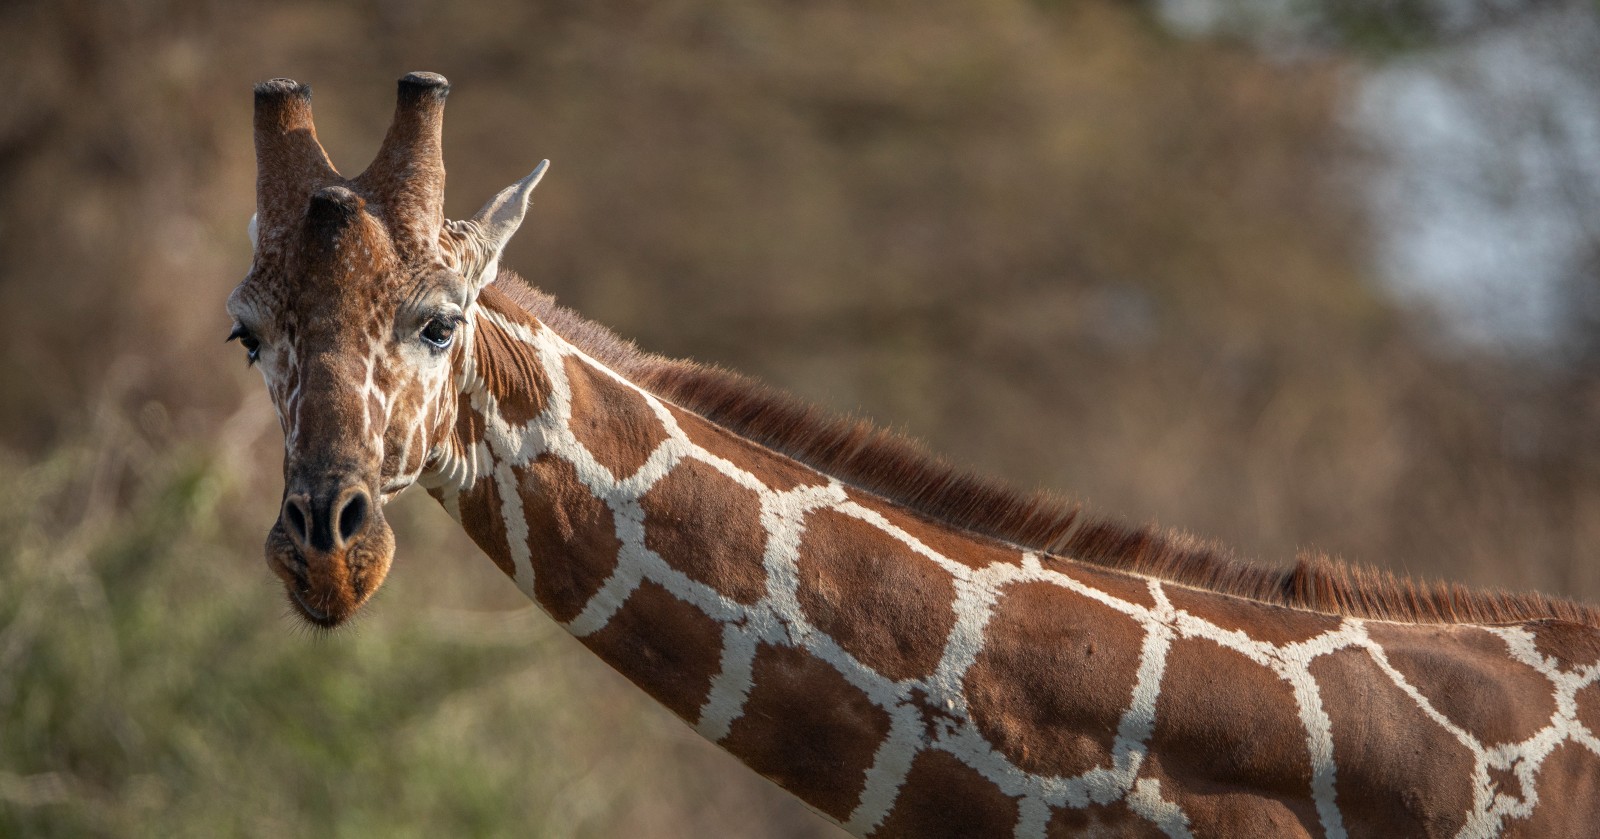 A photograph of an adult giraffe. the photo shows the head and neck of the animal only, stretching from the right hand side of the picture to the left. In the background there are trees and a blue sky.